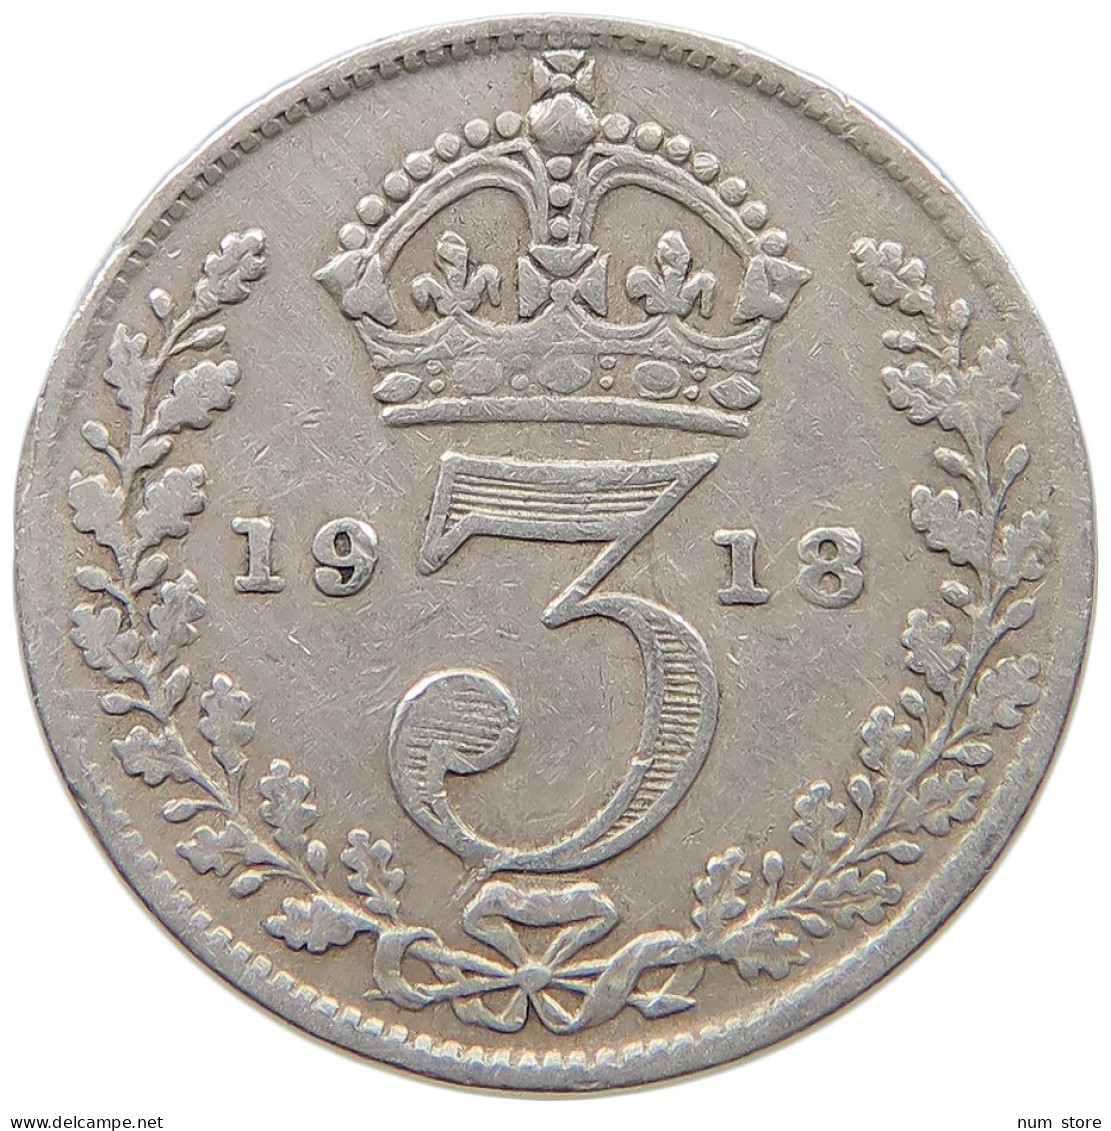 GREAT BRITAIN THREEPENCE 1918 #s059 0537 - F. 3 Pence